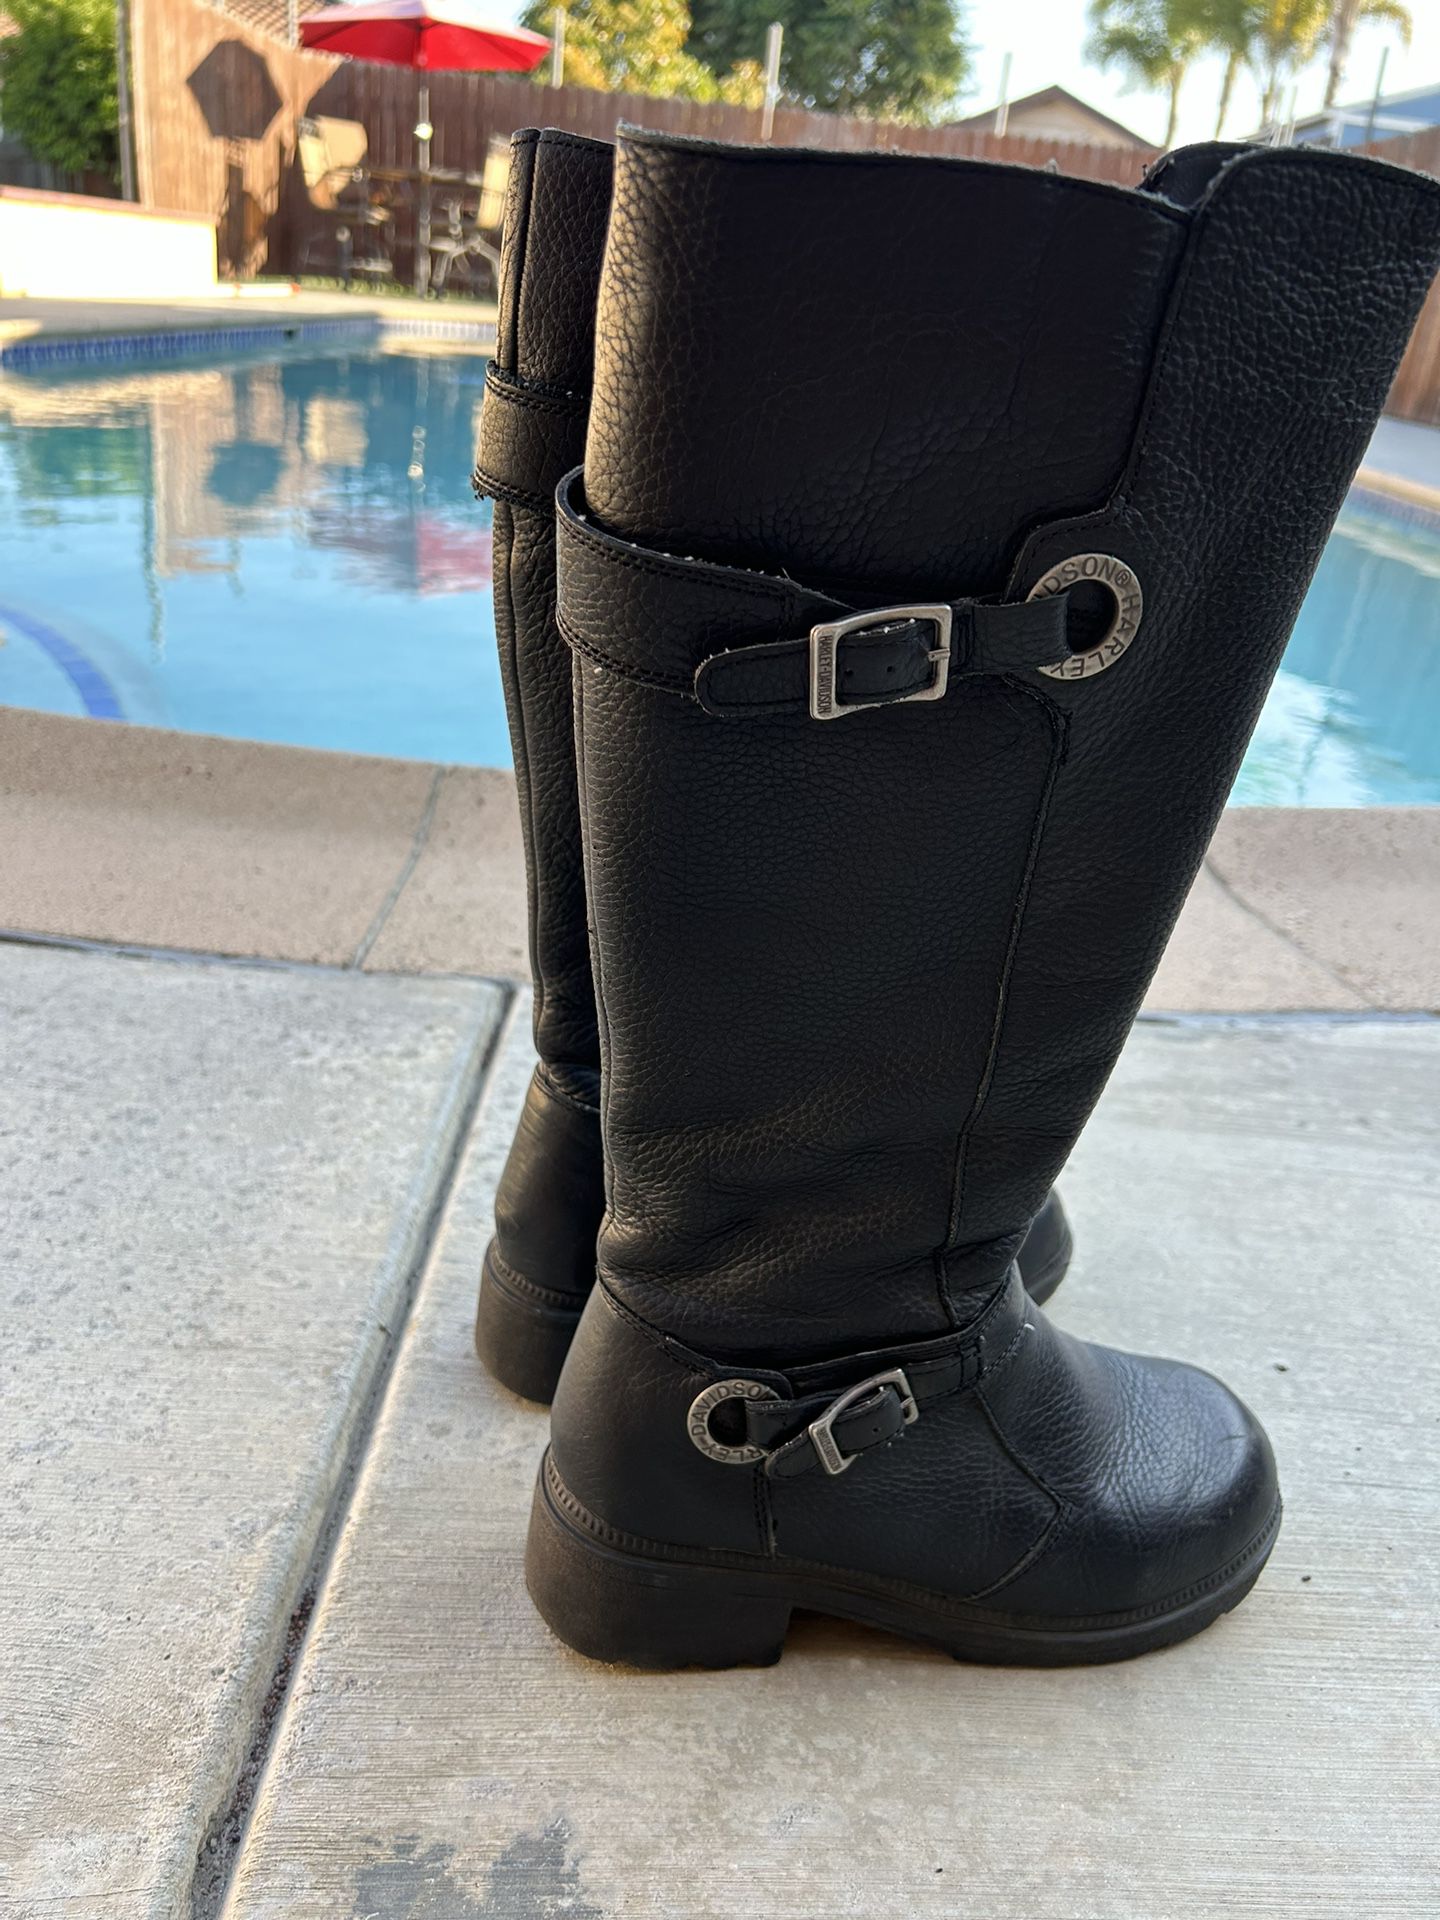 Women’s Tall Harley Boots 7.5